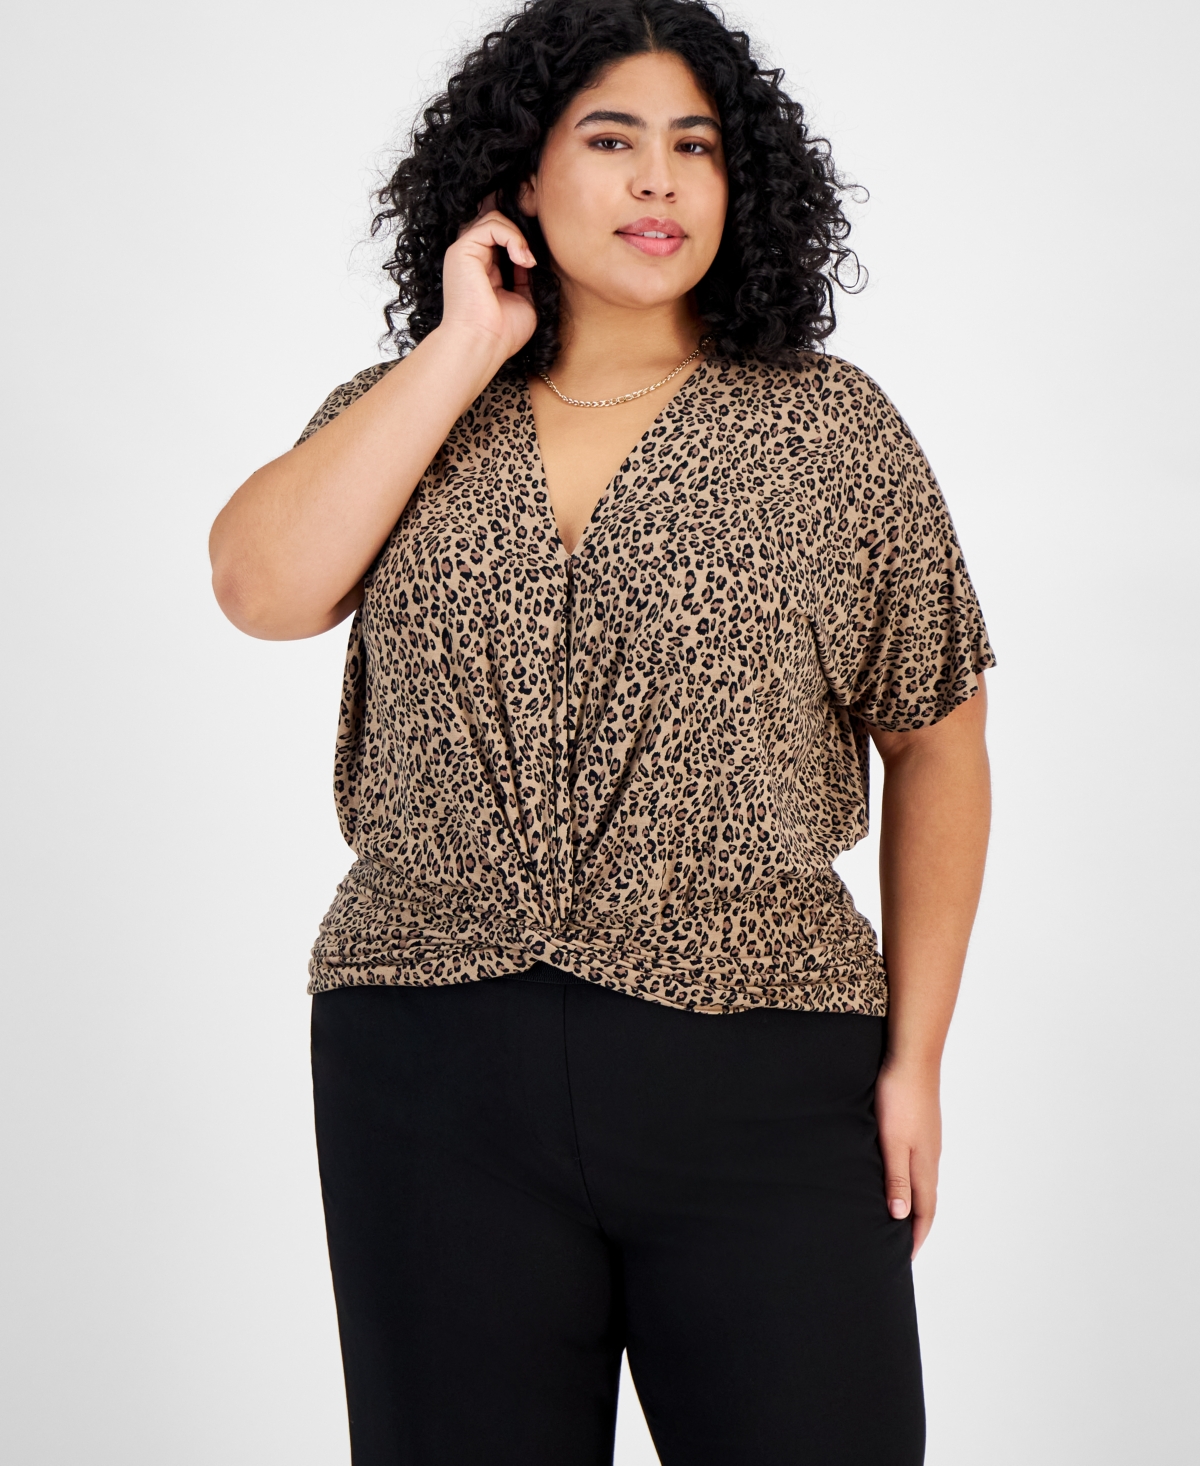 Bar Iii Plus Size Cheetah-Print Knot-Front Top, Created for Macy's - Molly  Cheetah